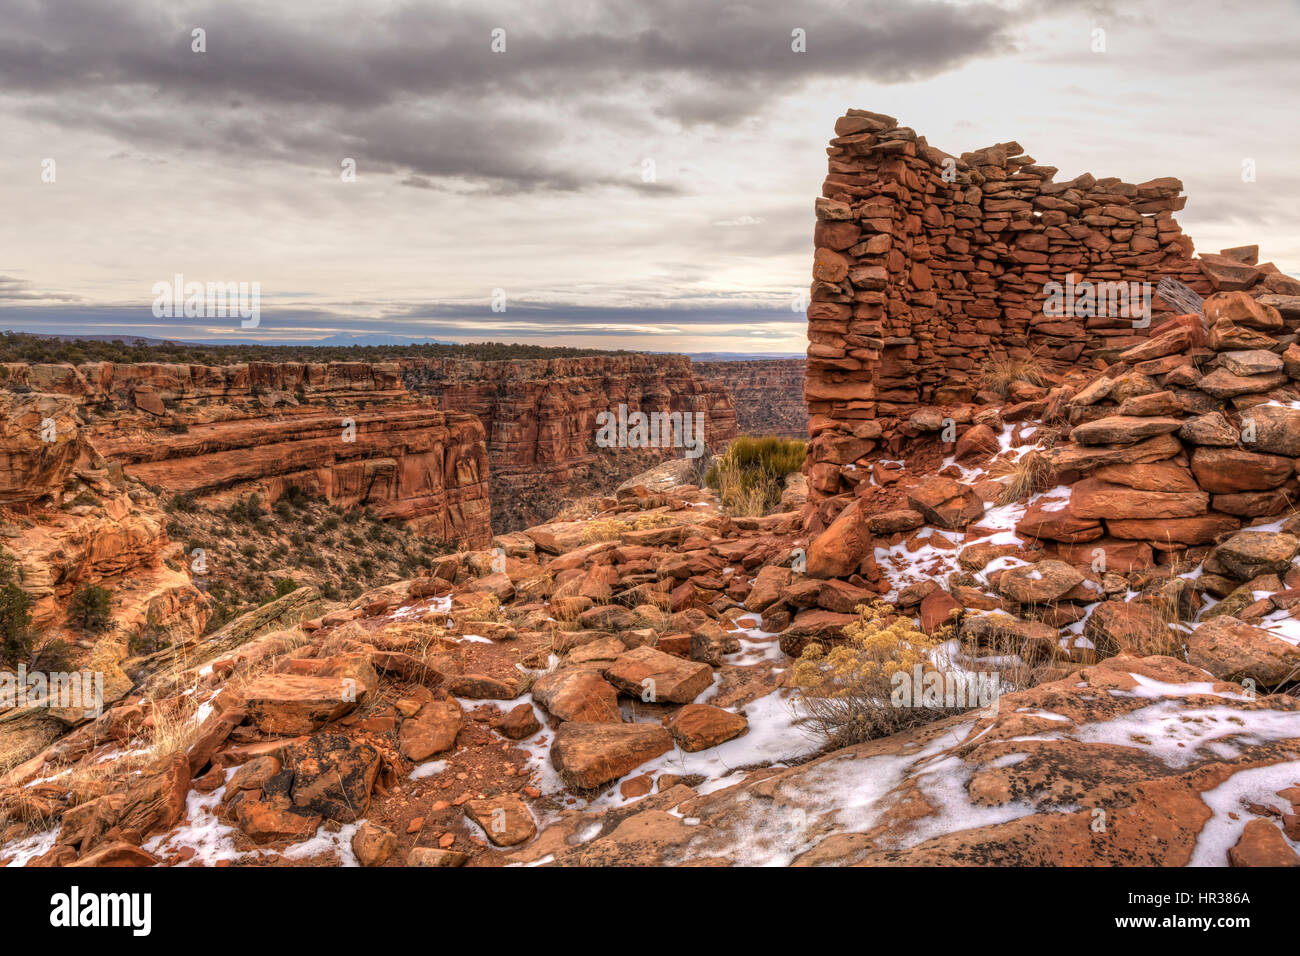 Snow-covered remnants of an Anasazi tower ruin on the rim of Mule Canyon in the Cedar Mesa area of Bears Ears National Monument Stock Photo